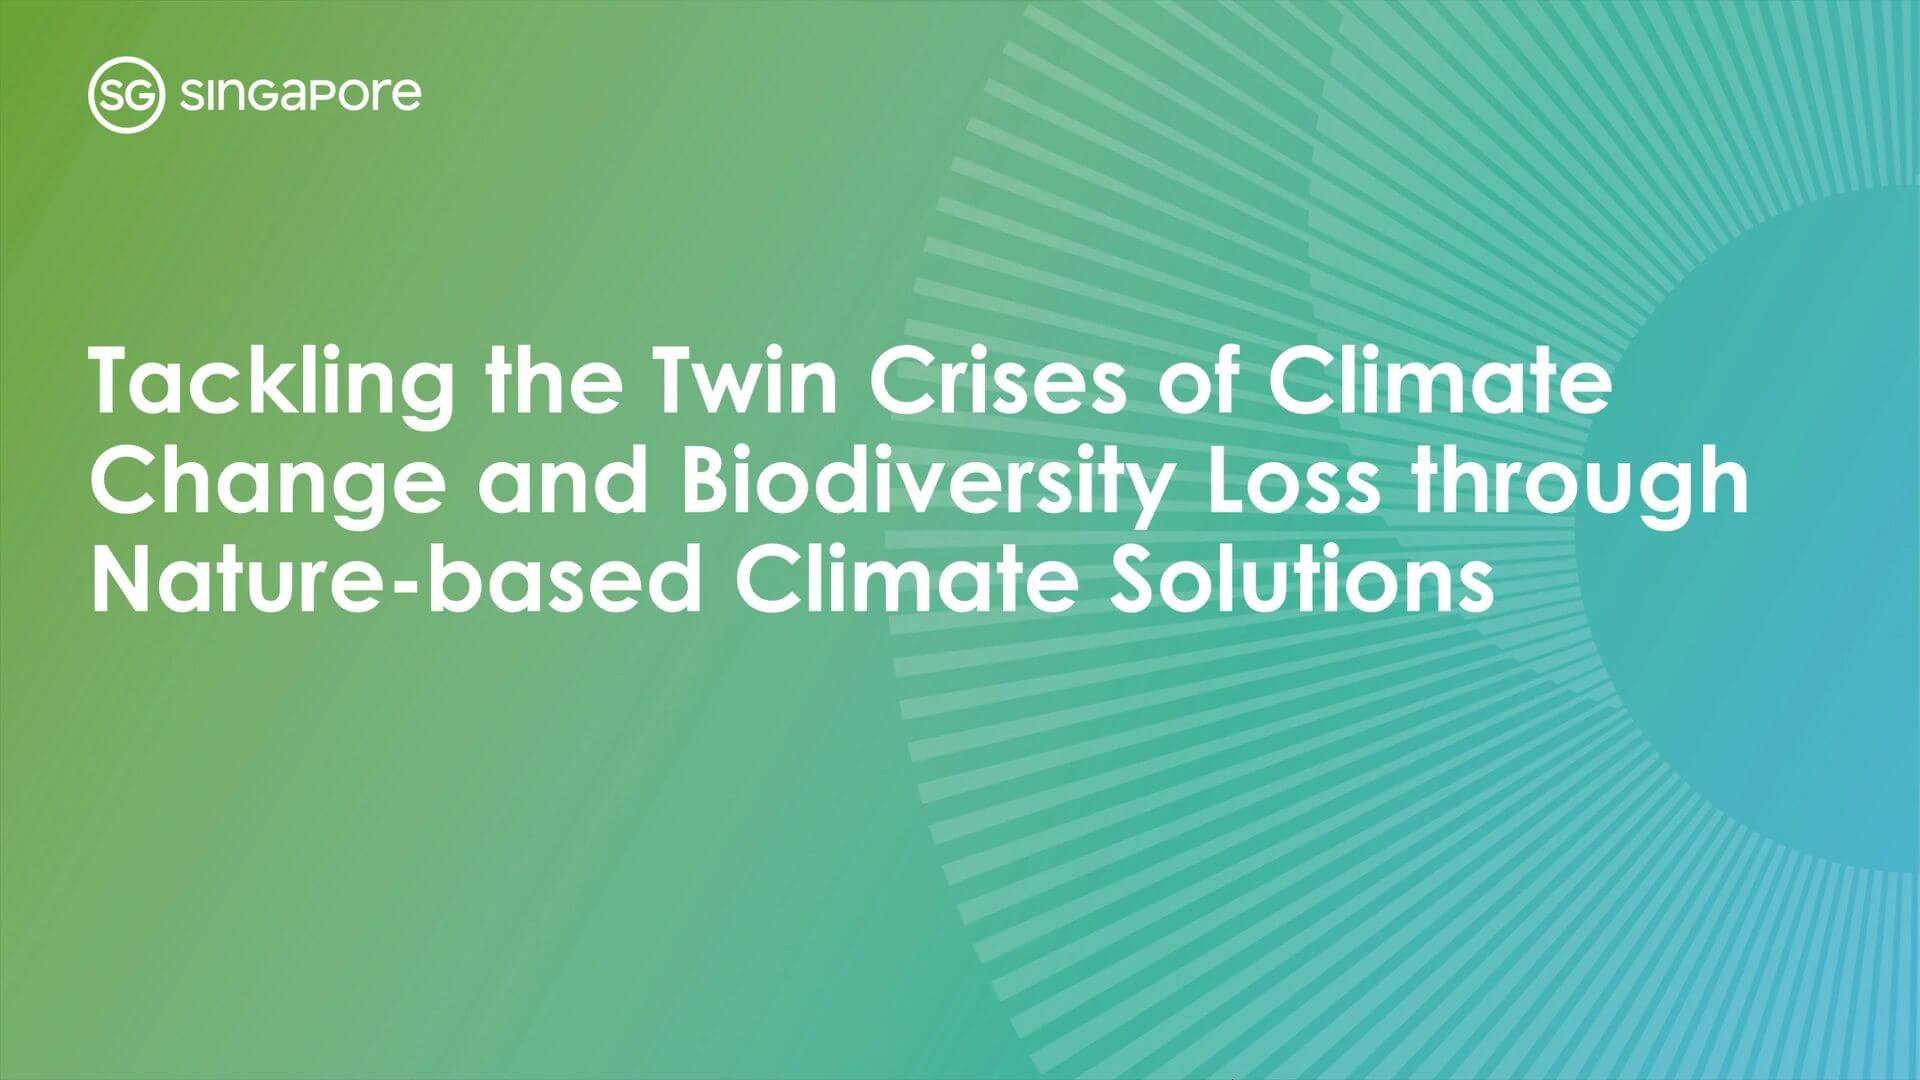 Tackling the Twin Crises of Climate Change and Biodiversity Loss through Nature-Based Climate Solutions